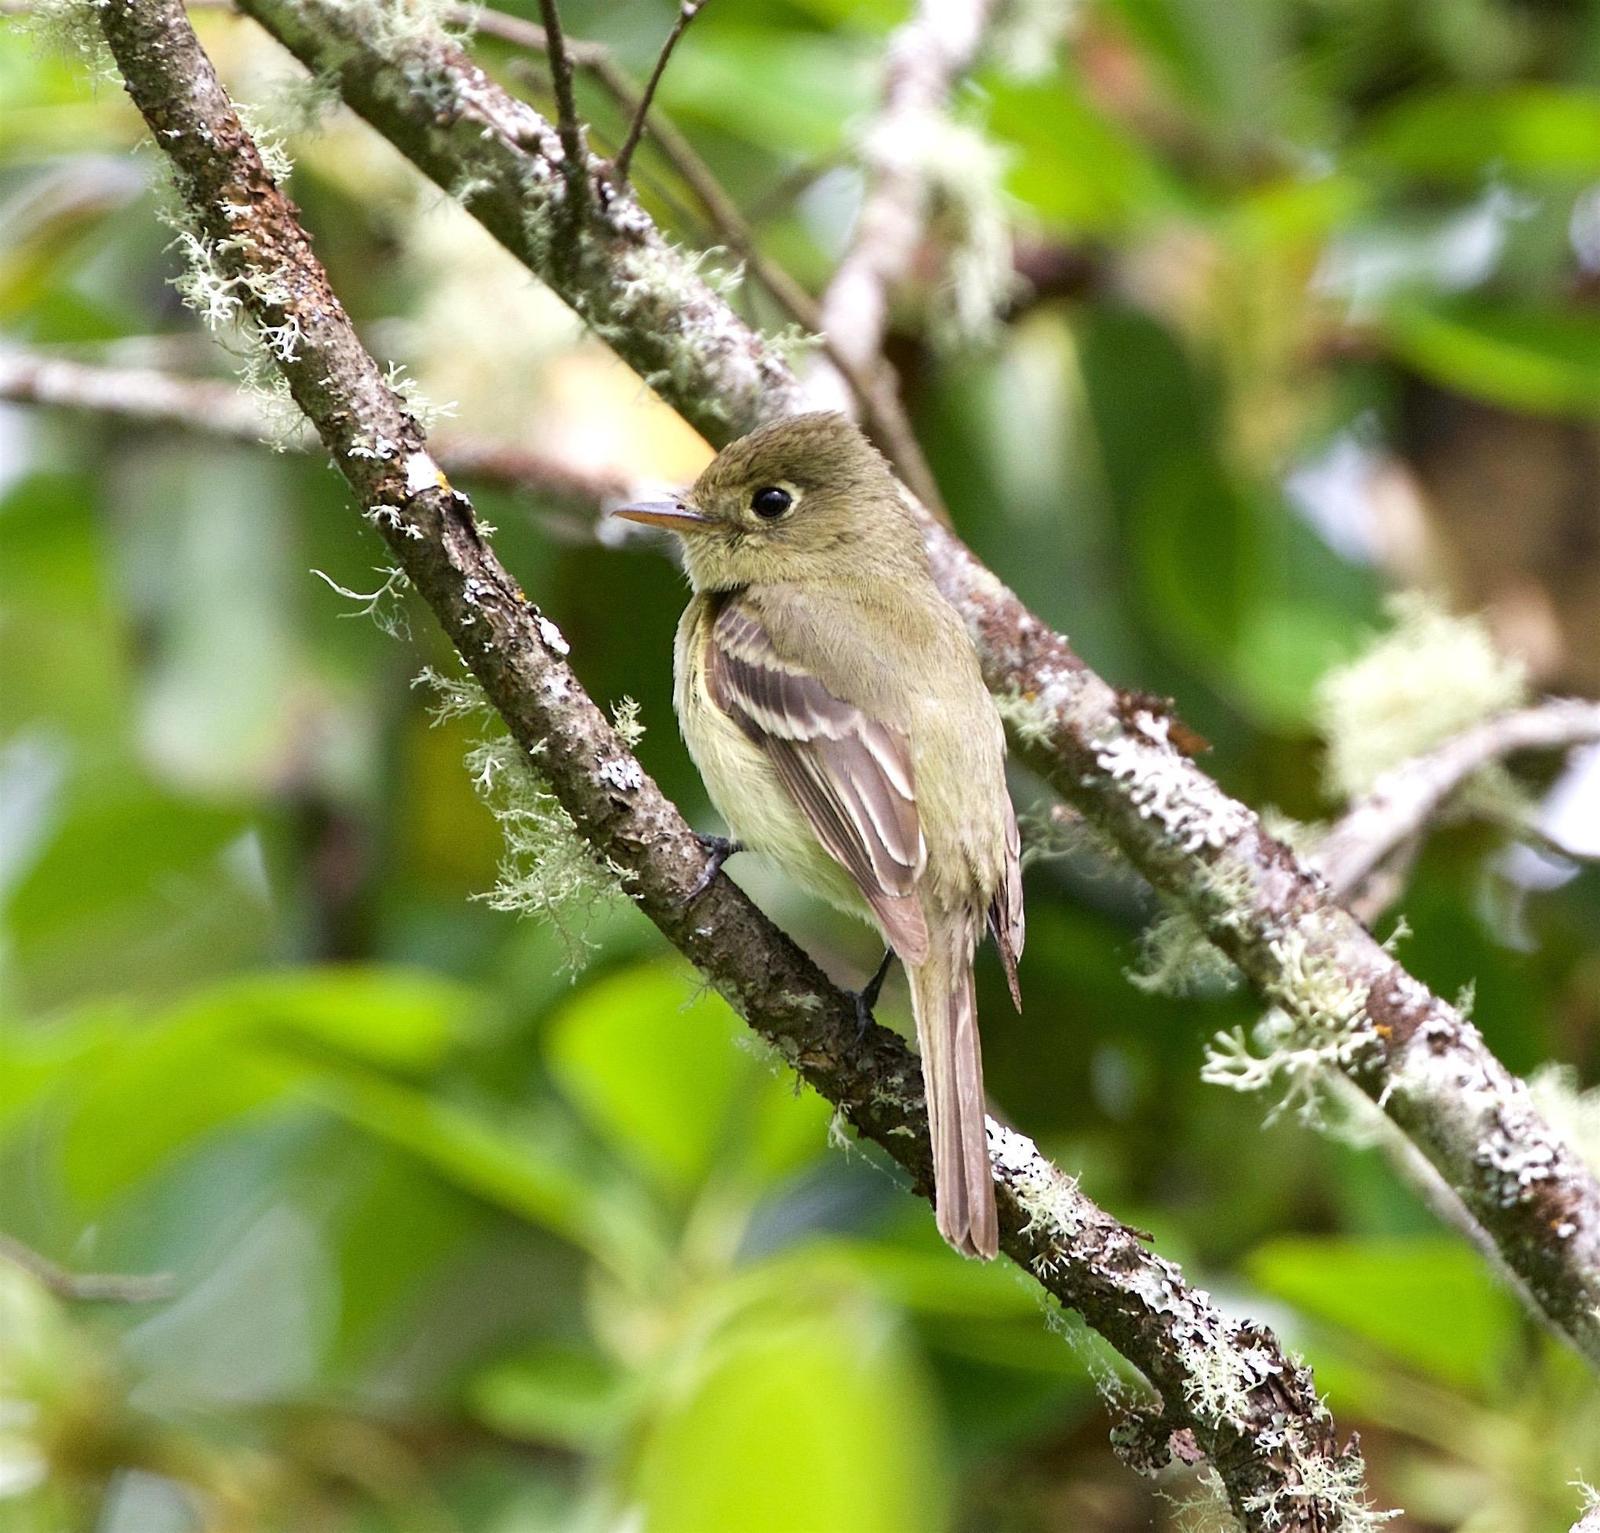 Pacific-slope Flycatcher Photo by Kathryn Keith